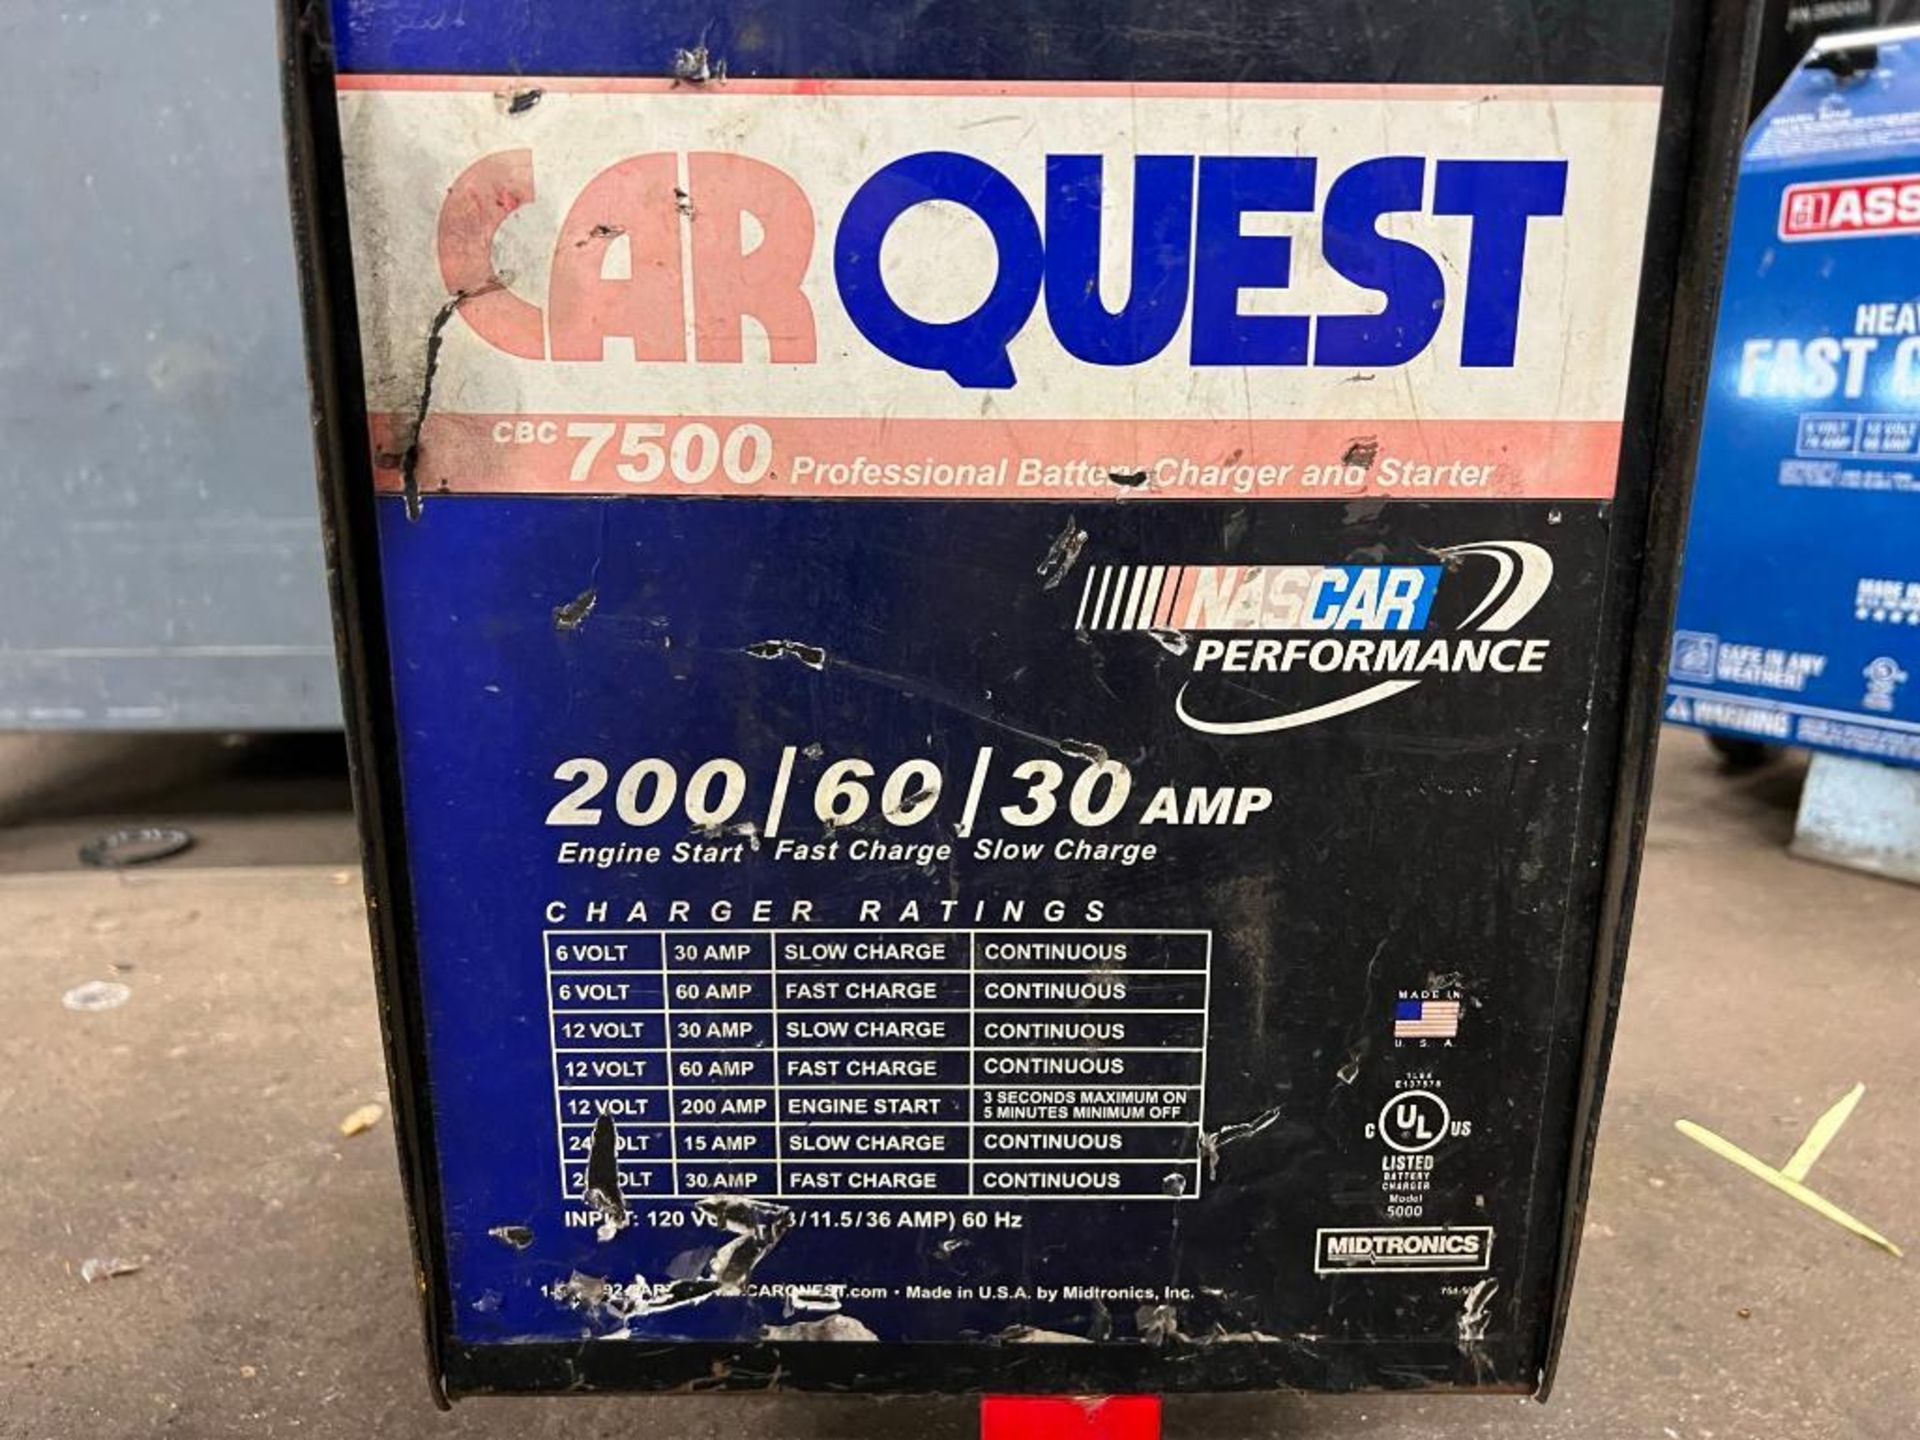 Car Quest Professional Battery Charger and Starter, model 7500 - Image 6 of 6